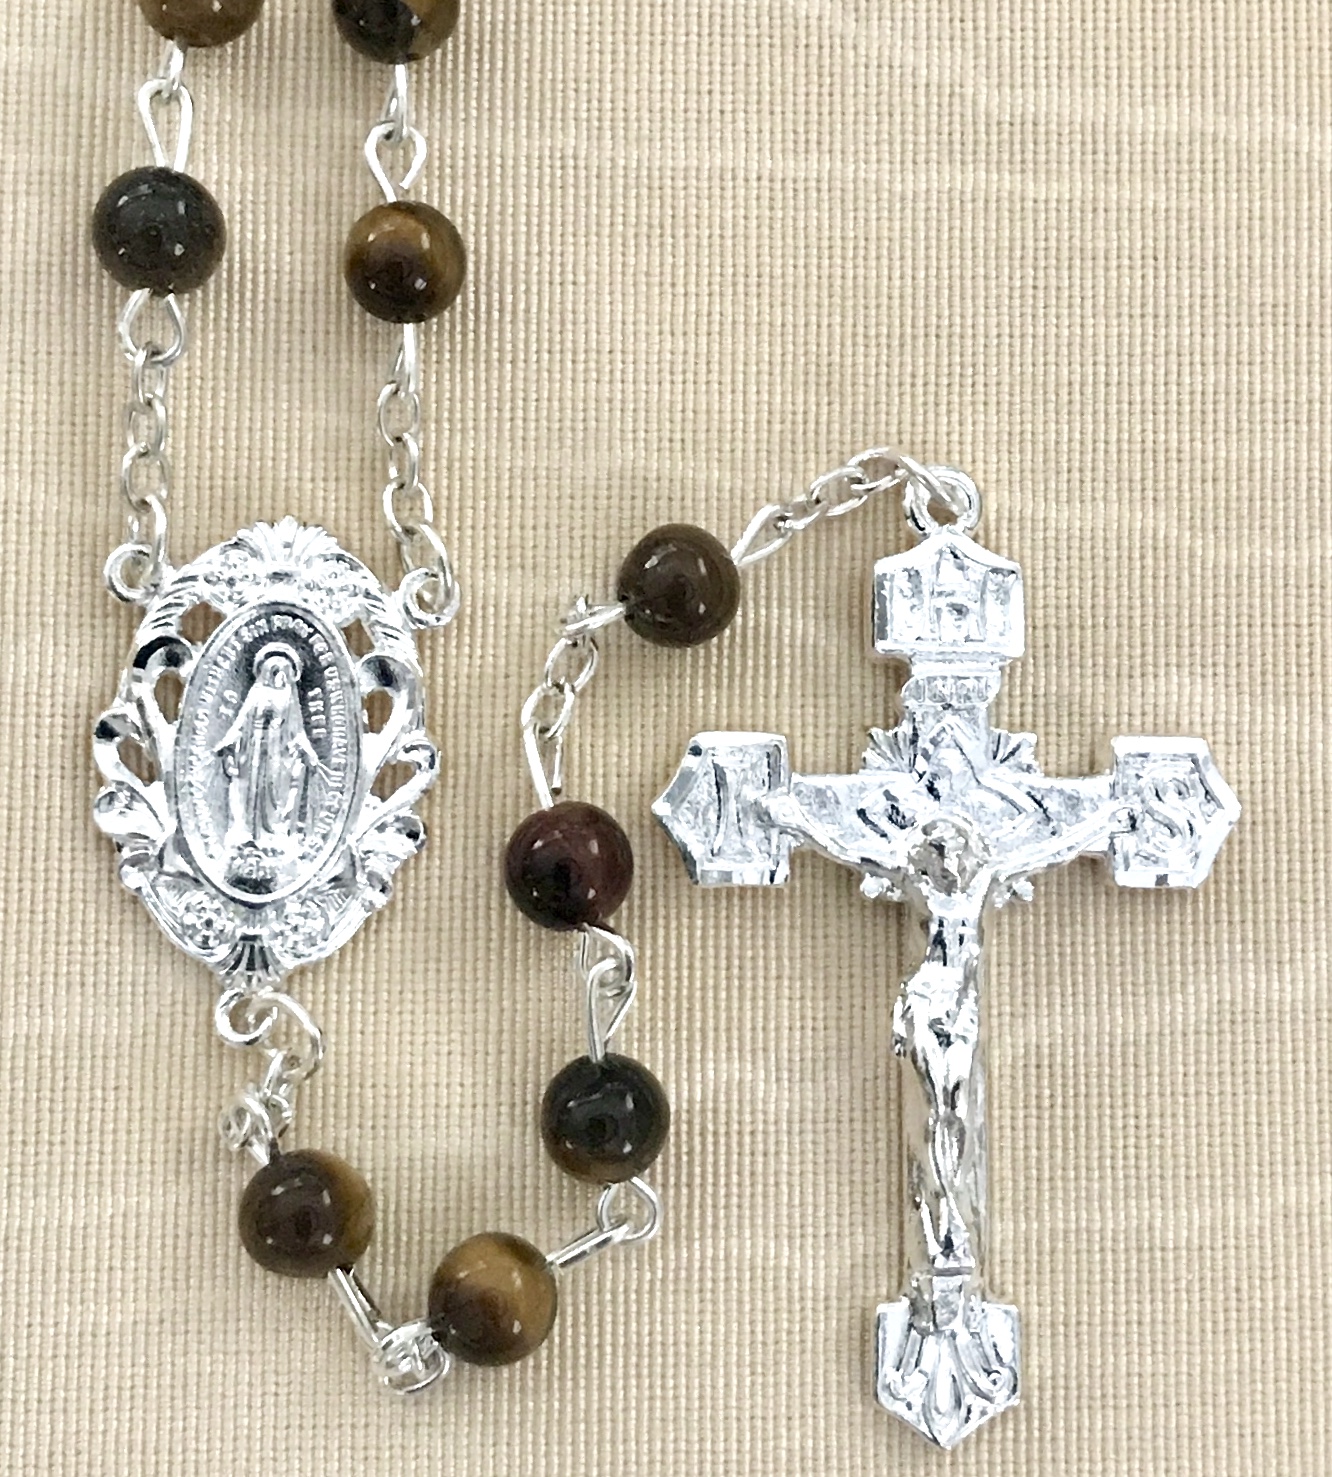 6mm TIGERS EYE GEMSTONE ROSARY WITH STERLING SILVER PLATED CRUCIFIX AND CENTER GIFT BOXED